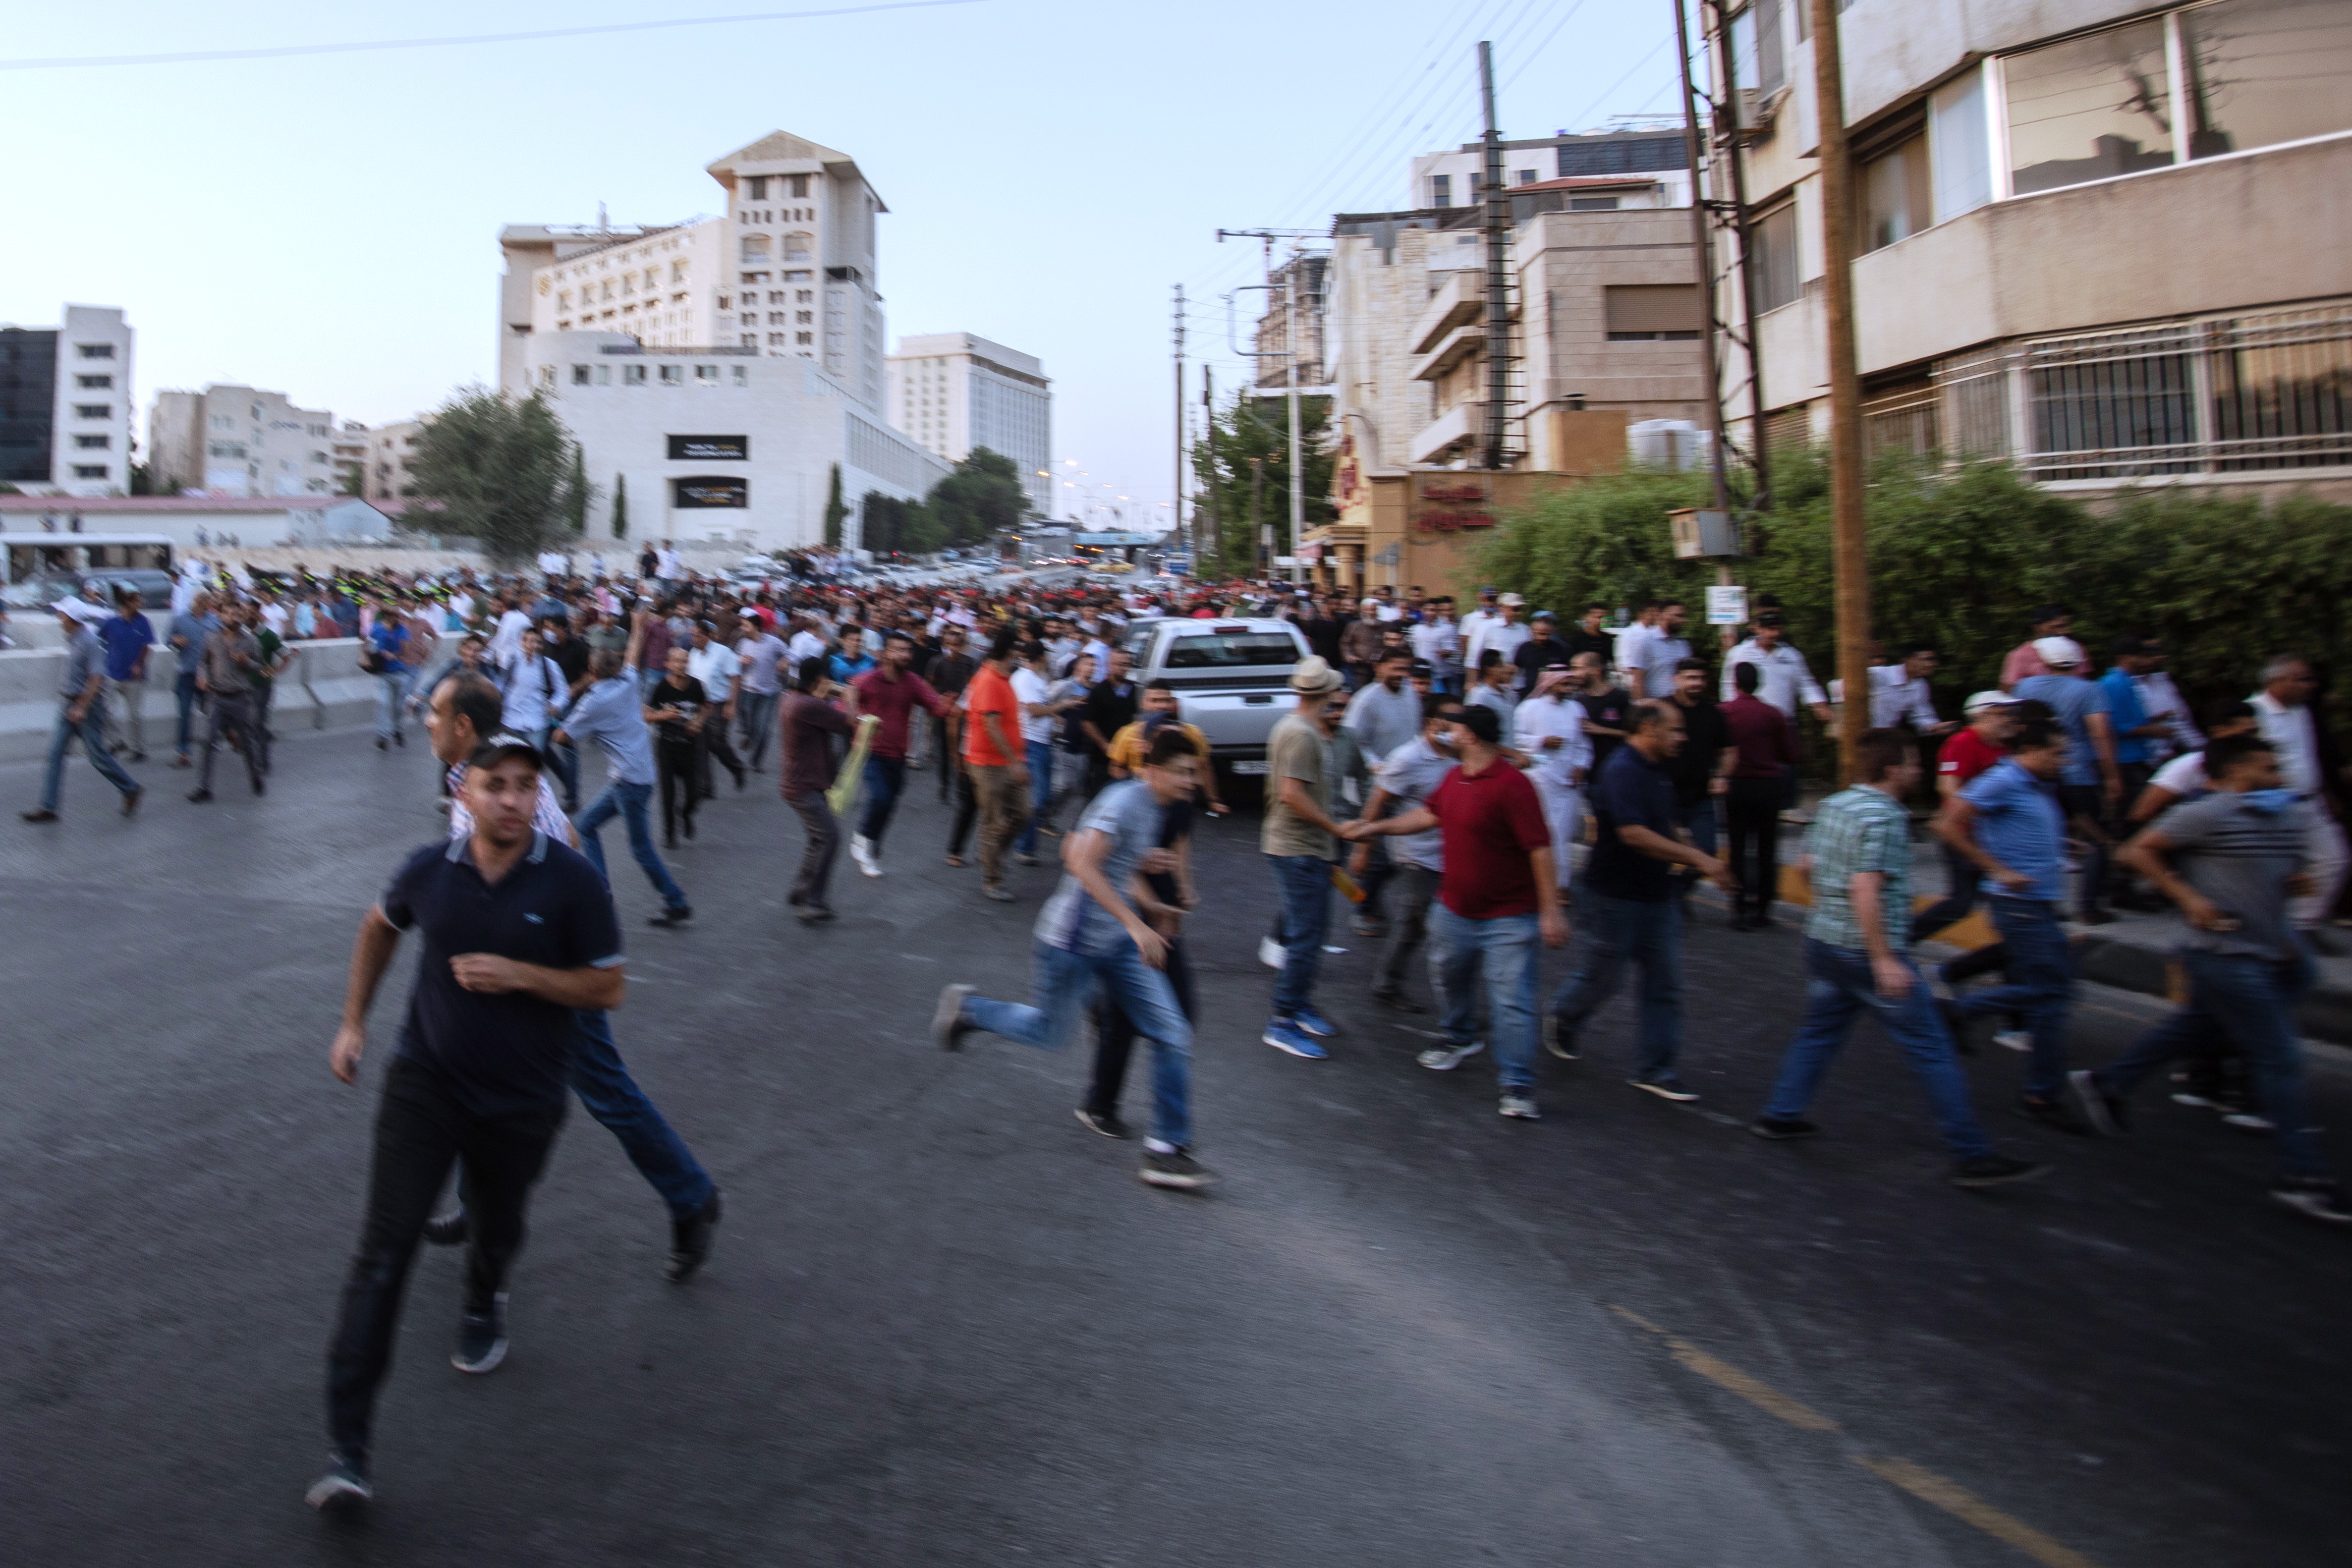 Teachers fleeing the security forces, following a clash during a demonstration held near the 5th circle on 29.07.2020 to protest the decision to dissolve the teacher's syndicate and arrest its leaders (photo: Sherbel Dissi)